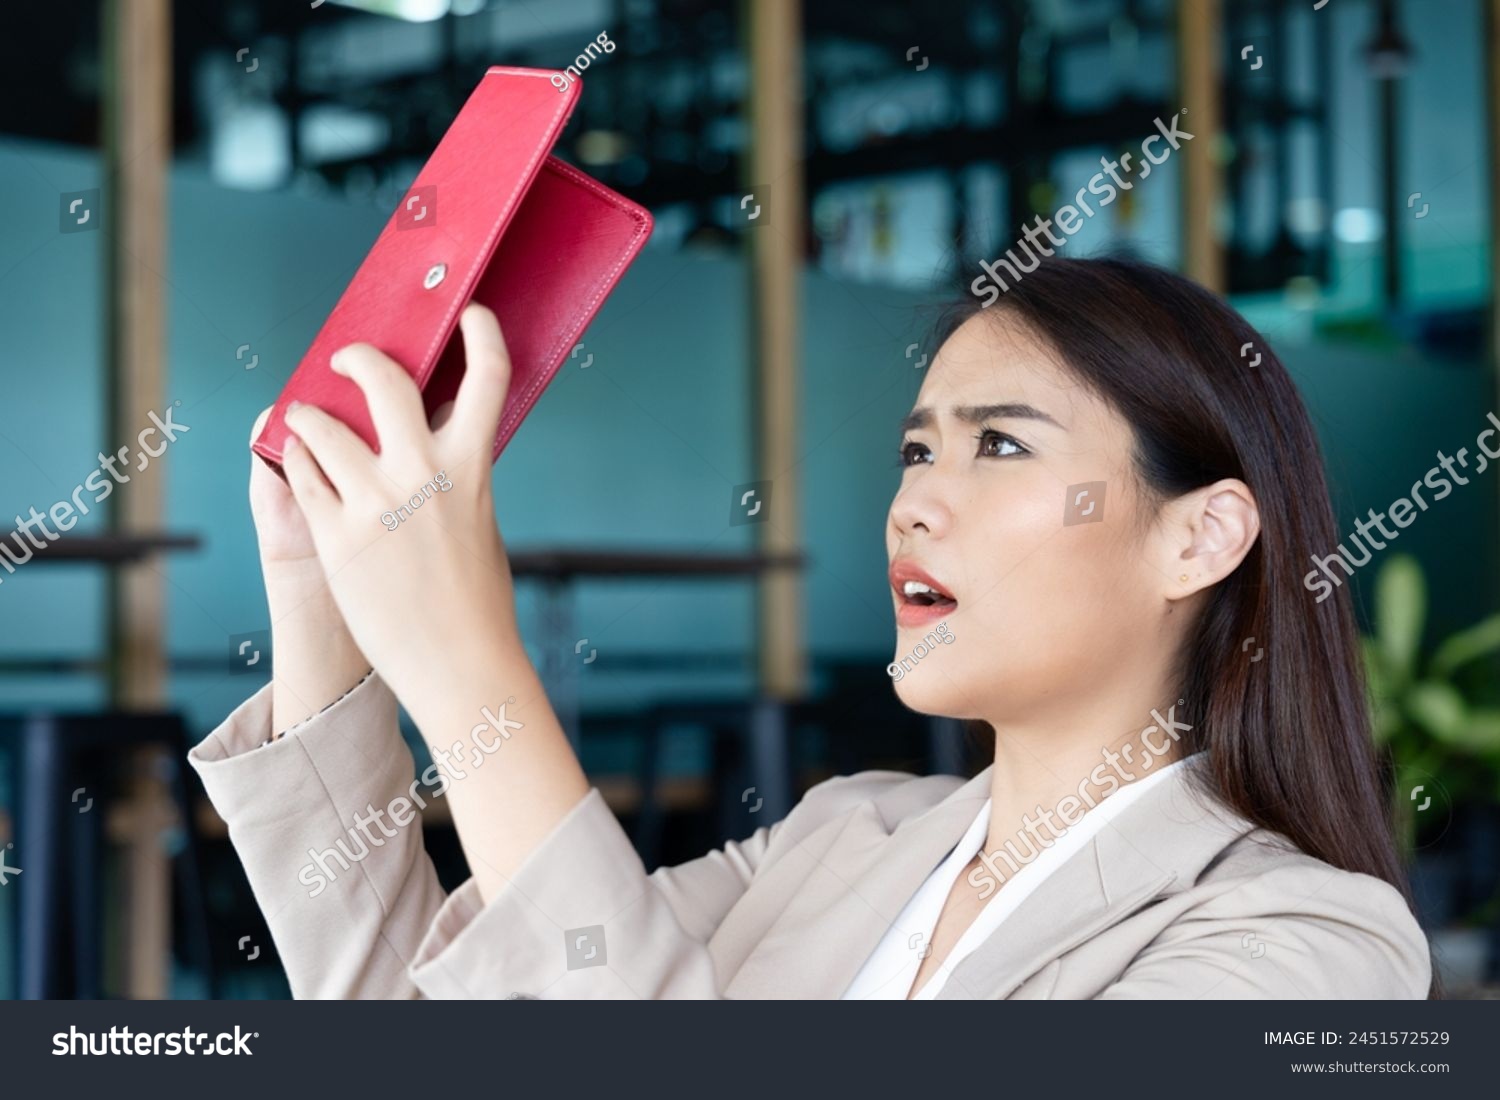 Sad and unhappy office worker woman or business woman having no money, concept of indebted debt with no money, economic recession, joblessness, unemployment, layoff, financial problem, empty wallet